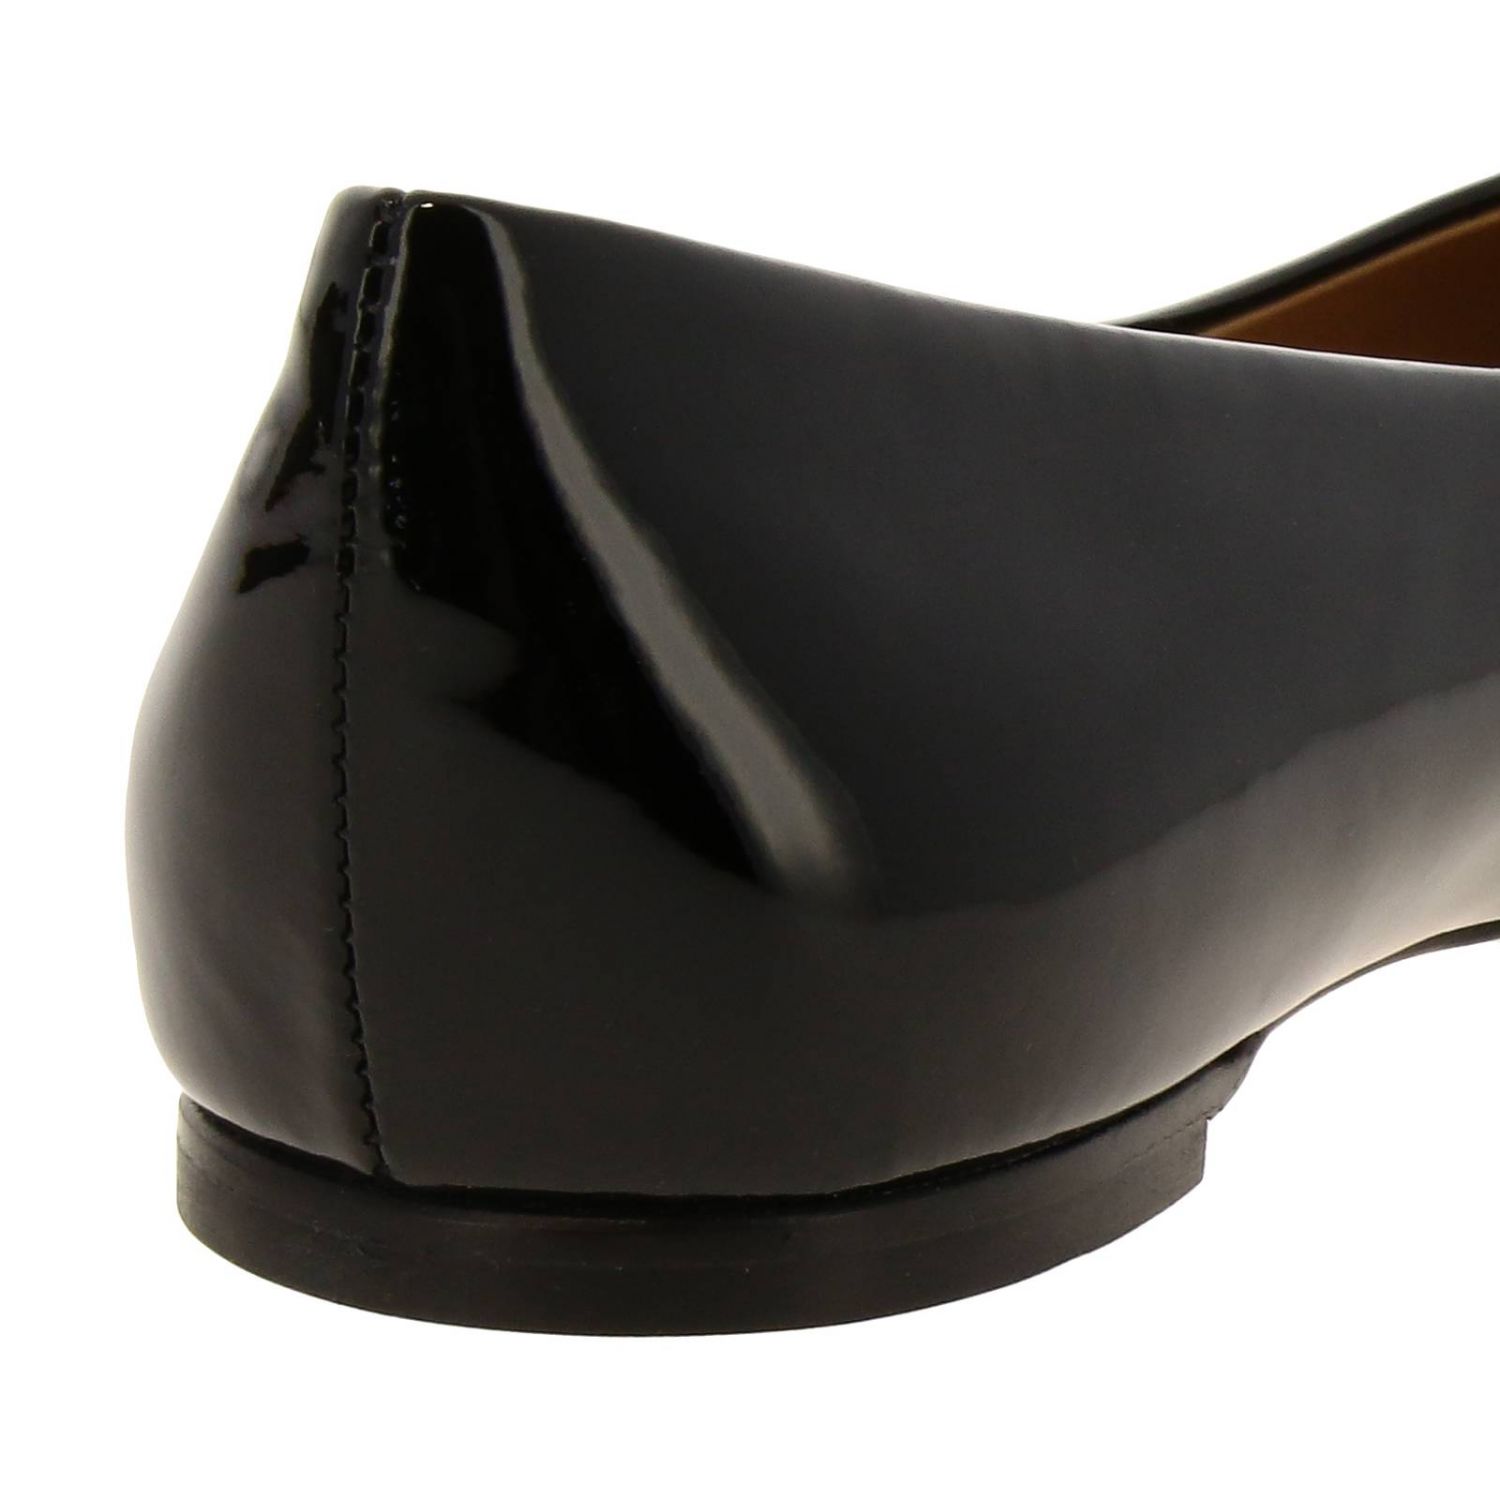 Salvatore Ferragamo Outlet: Varina ballet flats in patent leather 